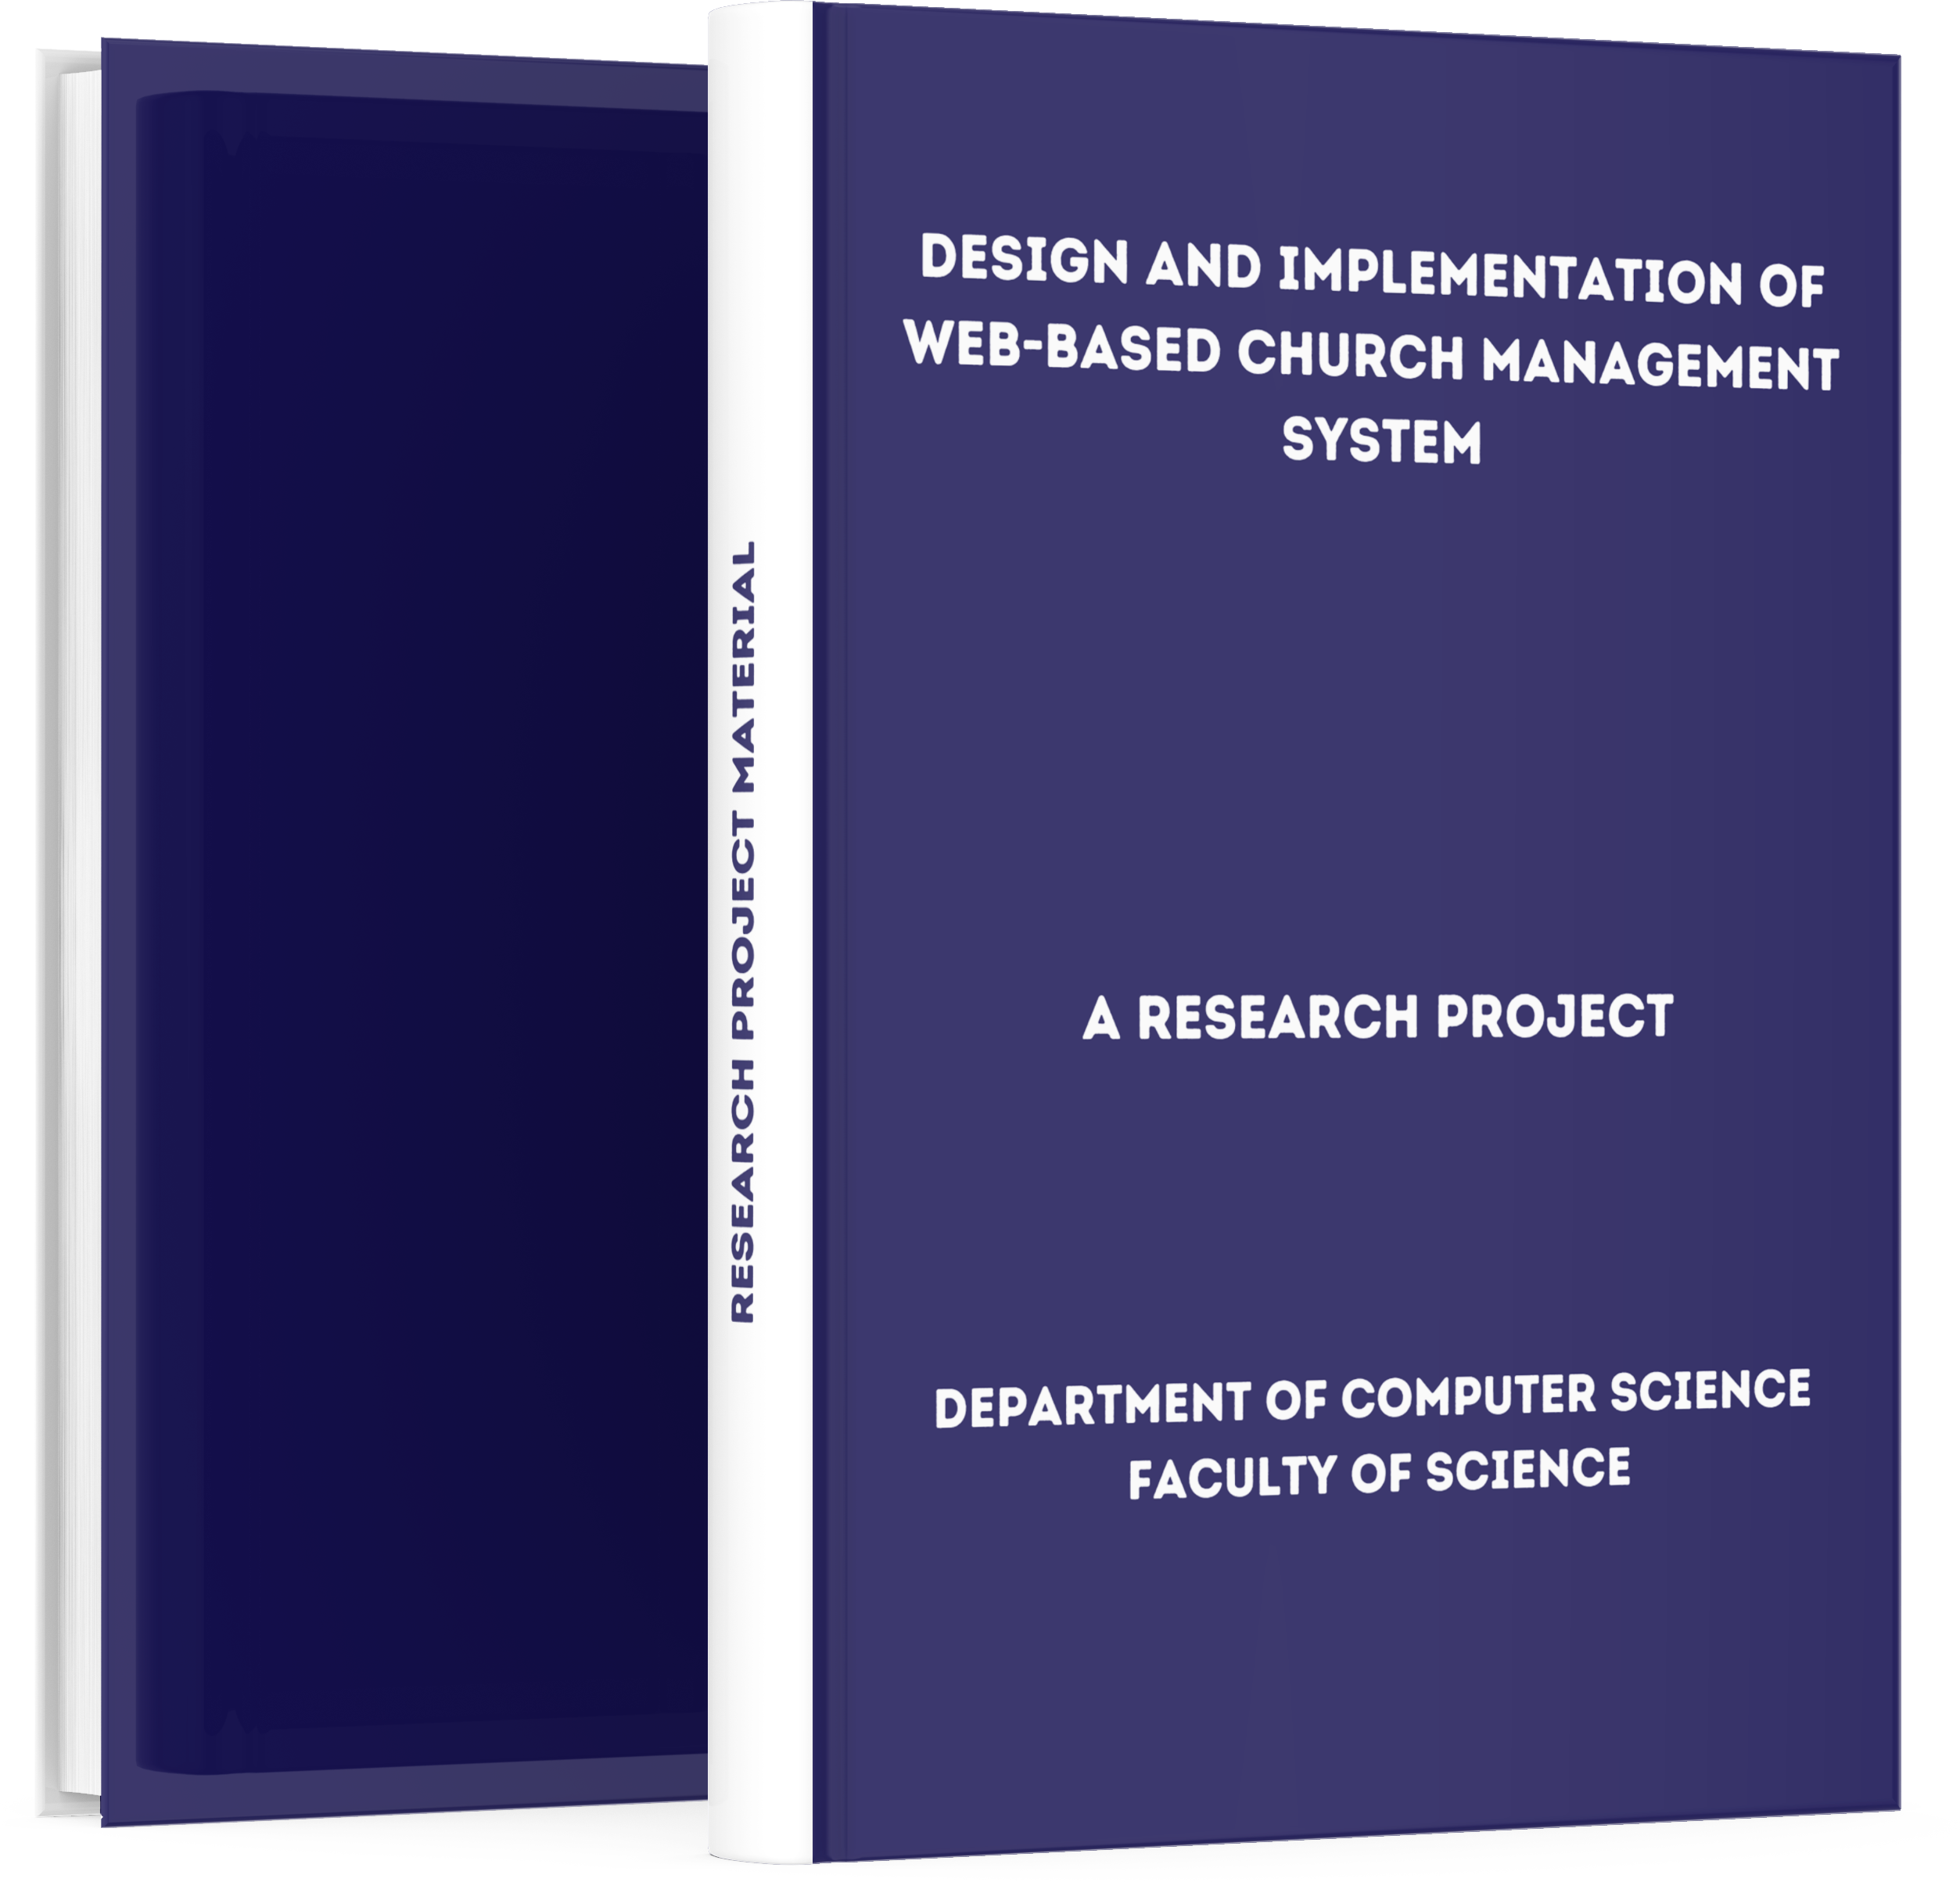 web based church management system thesis pdf